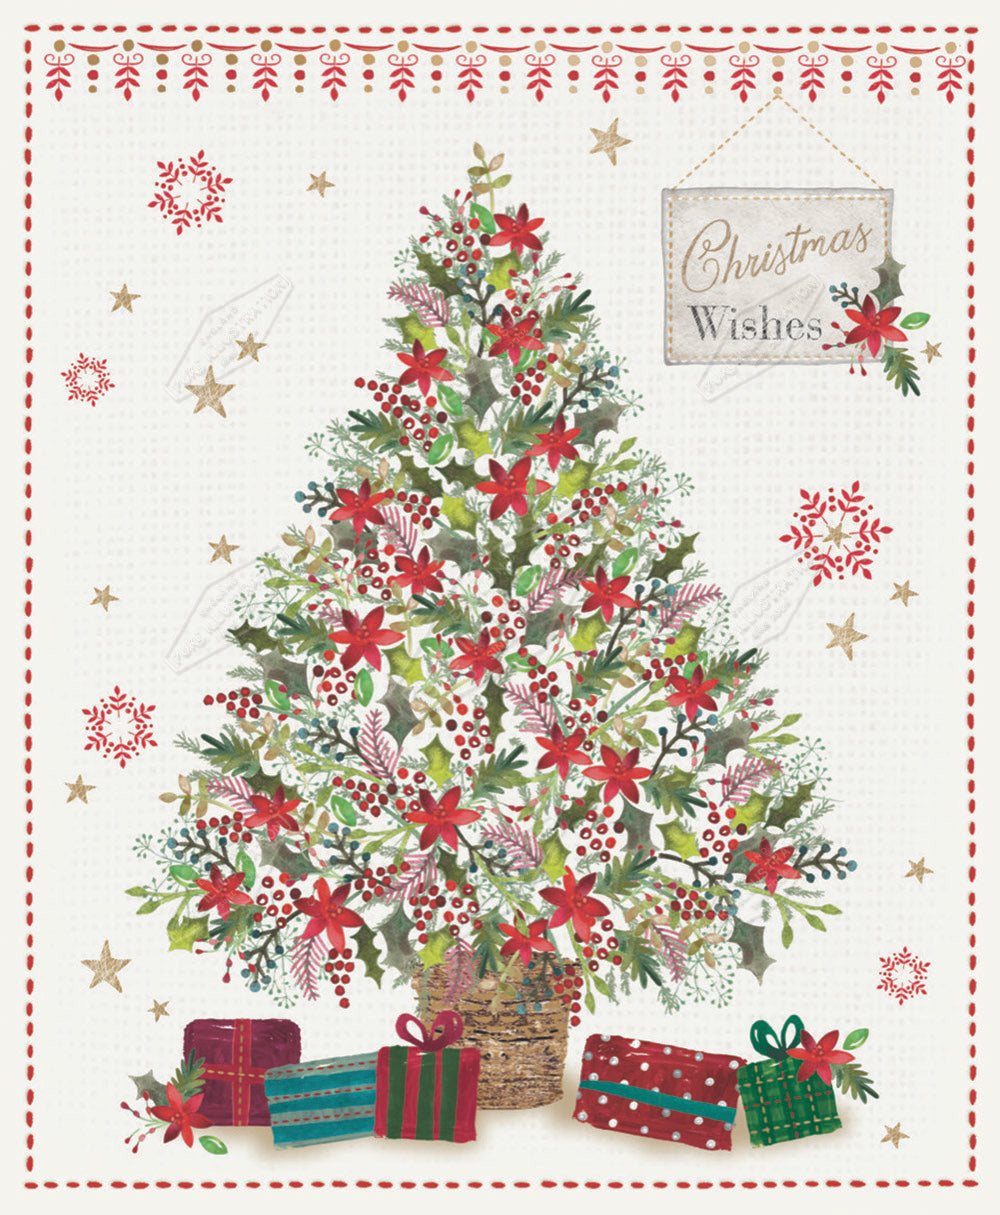 00032243KSP- Kerry Spurling is represented by Pure Art Licensing Agency - Christmas Greeting Card Design